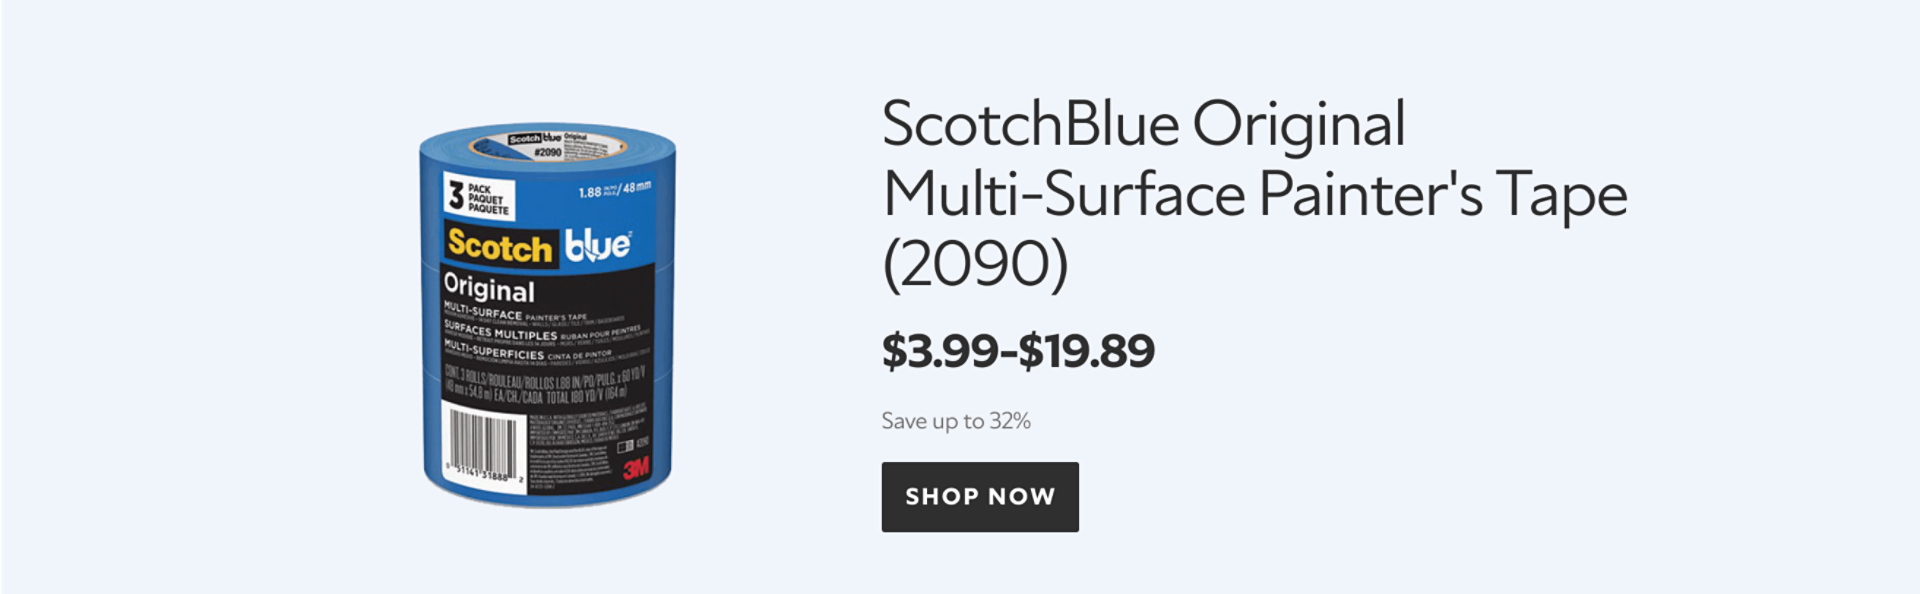 Featured product. ScotchBlue Original Multi-Surface Painter's Tape (2090). $3.99-$19.89. Save up to 32%. Shop now.